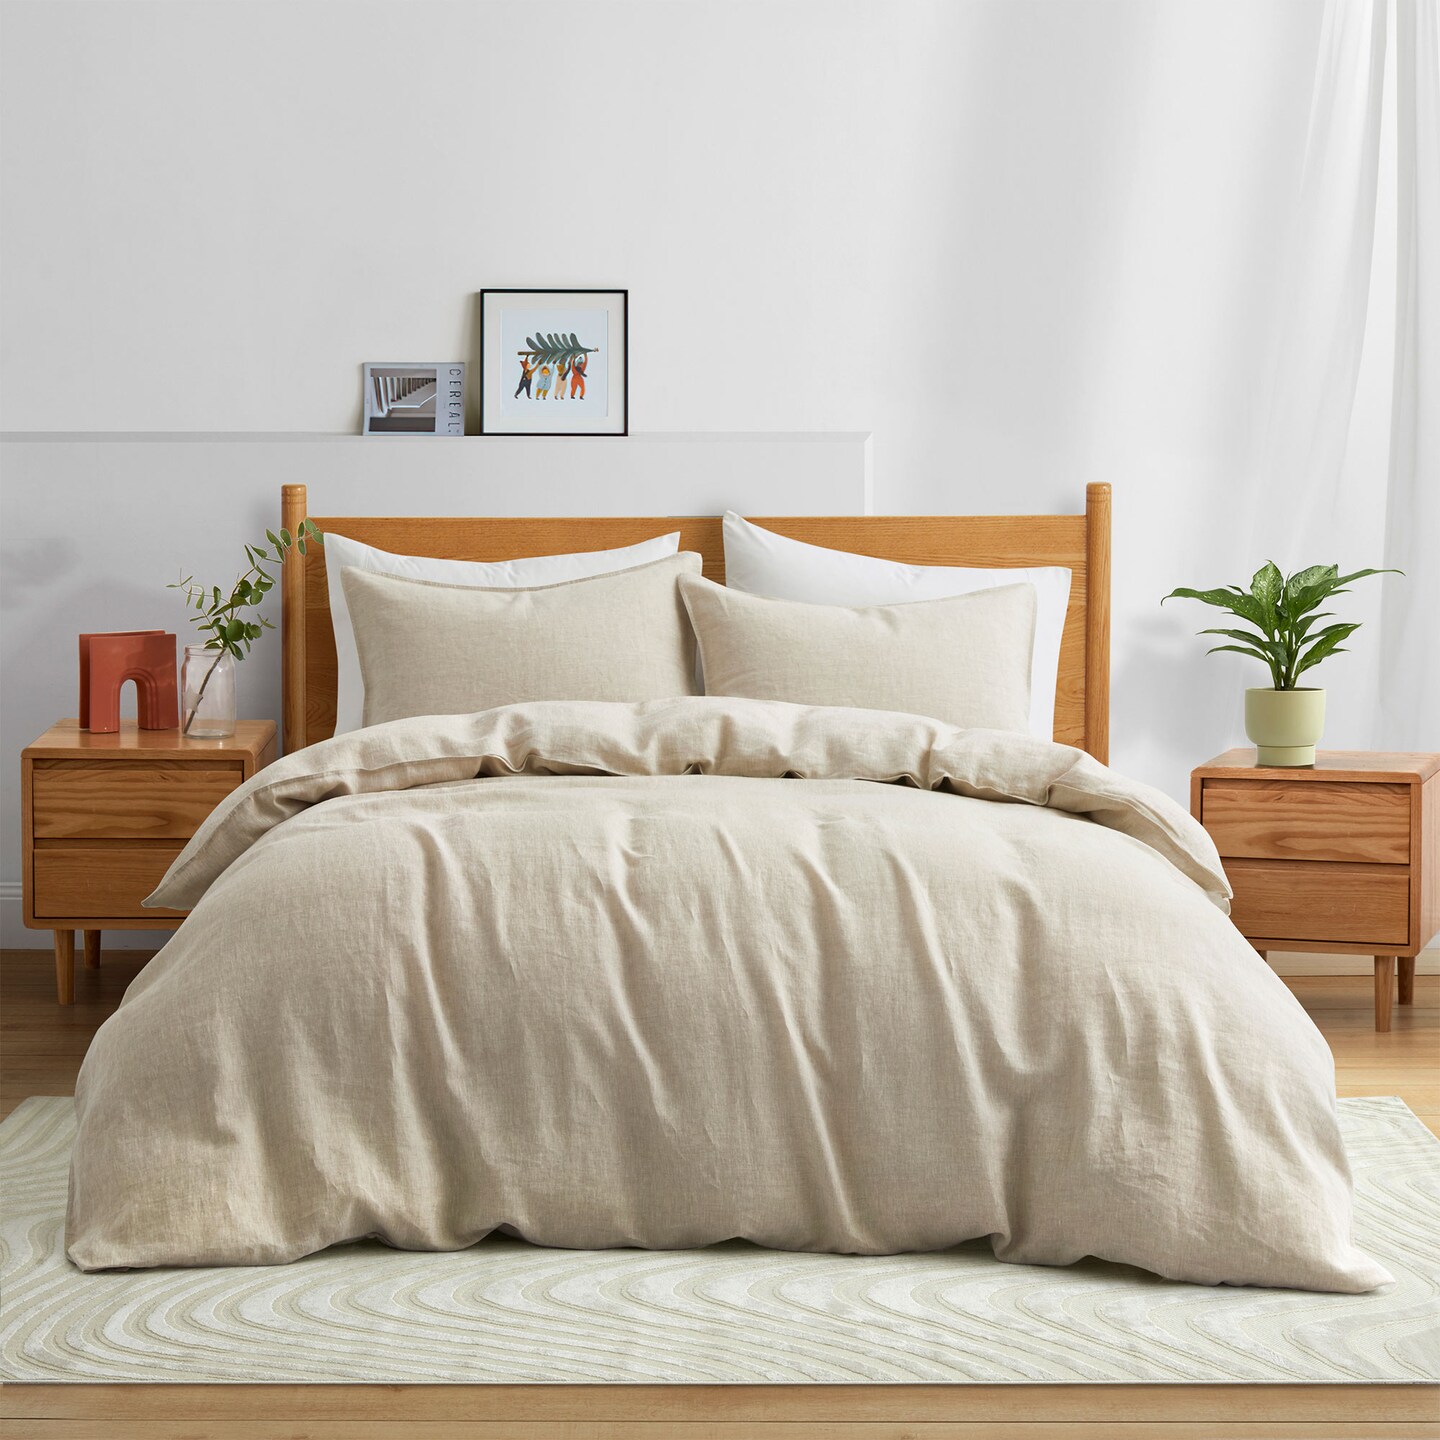 Puredown Pure Comfort and Luxury Bedding Bundle: All Season Organic Goose Down Bundle with Pillow-in-Pillow Design Goose Down